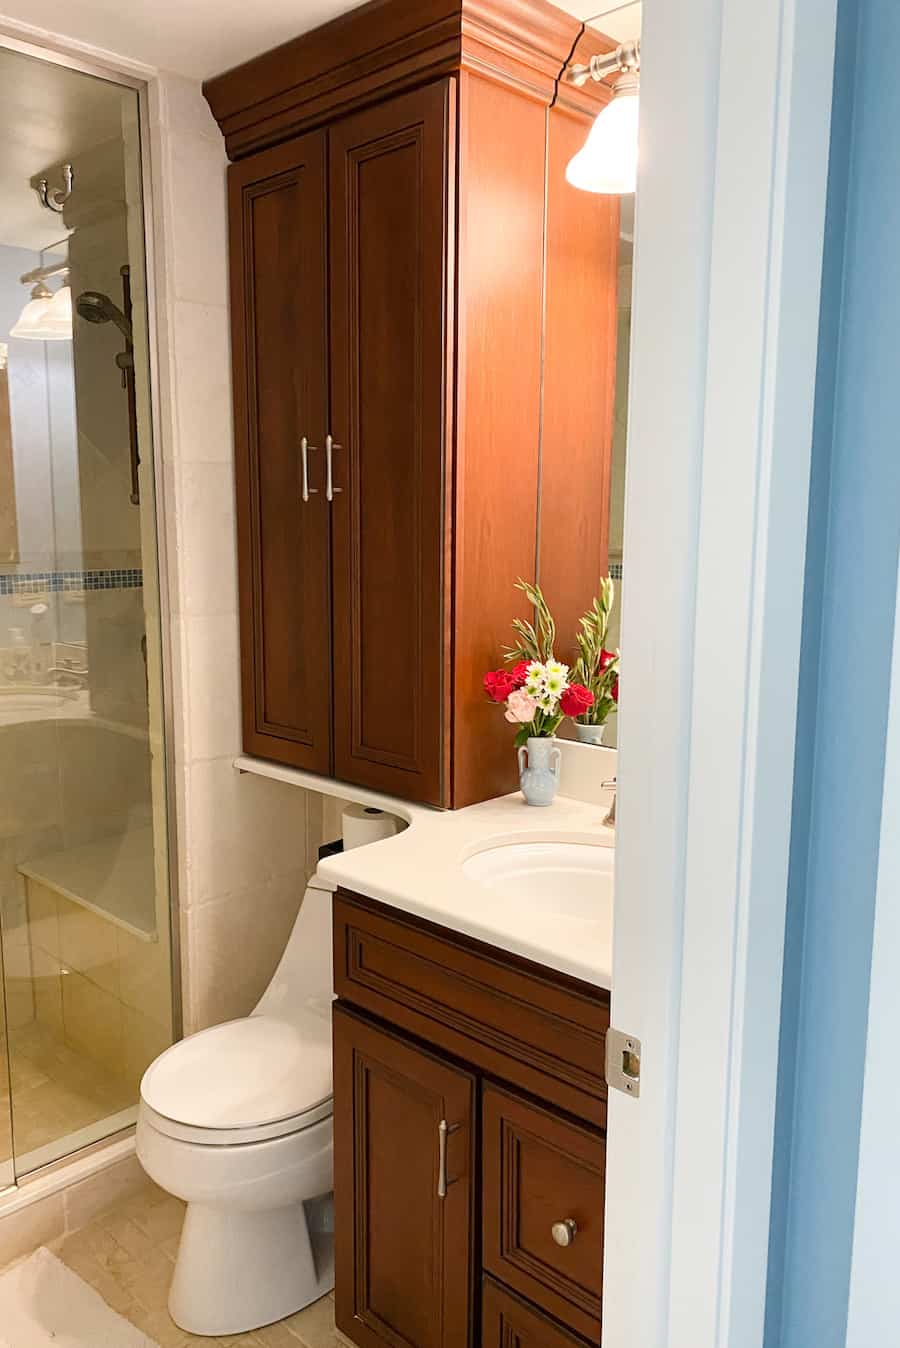 View into my small bathroom with white countertop, cherry wood cabinets and white toilet